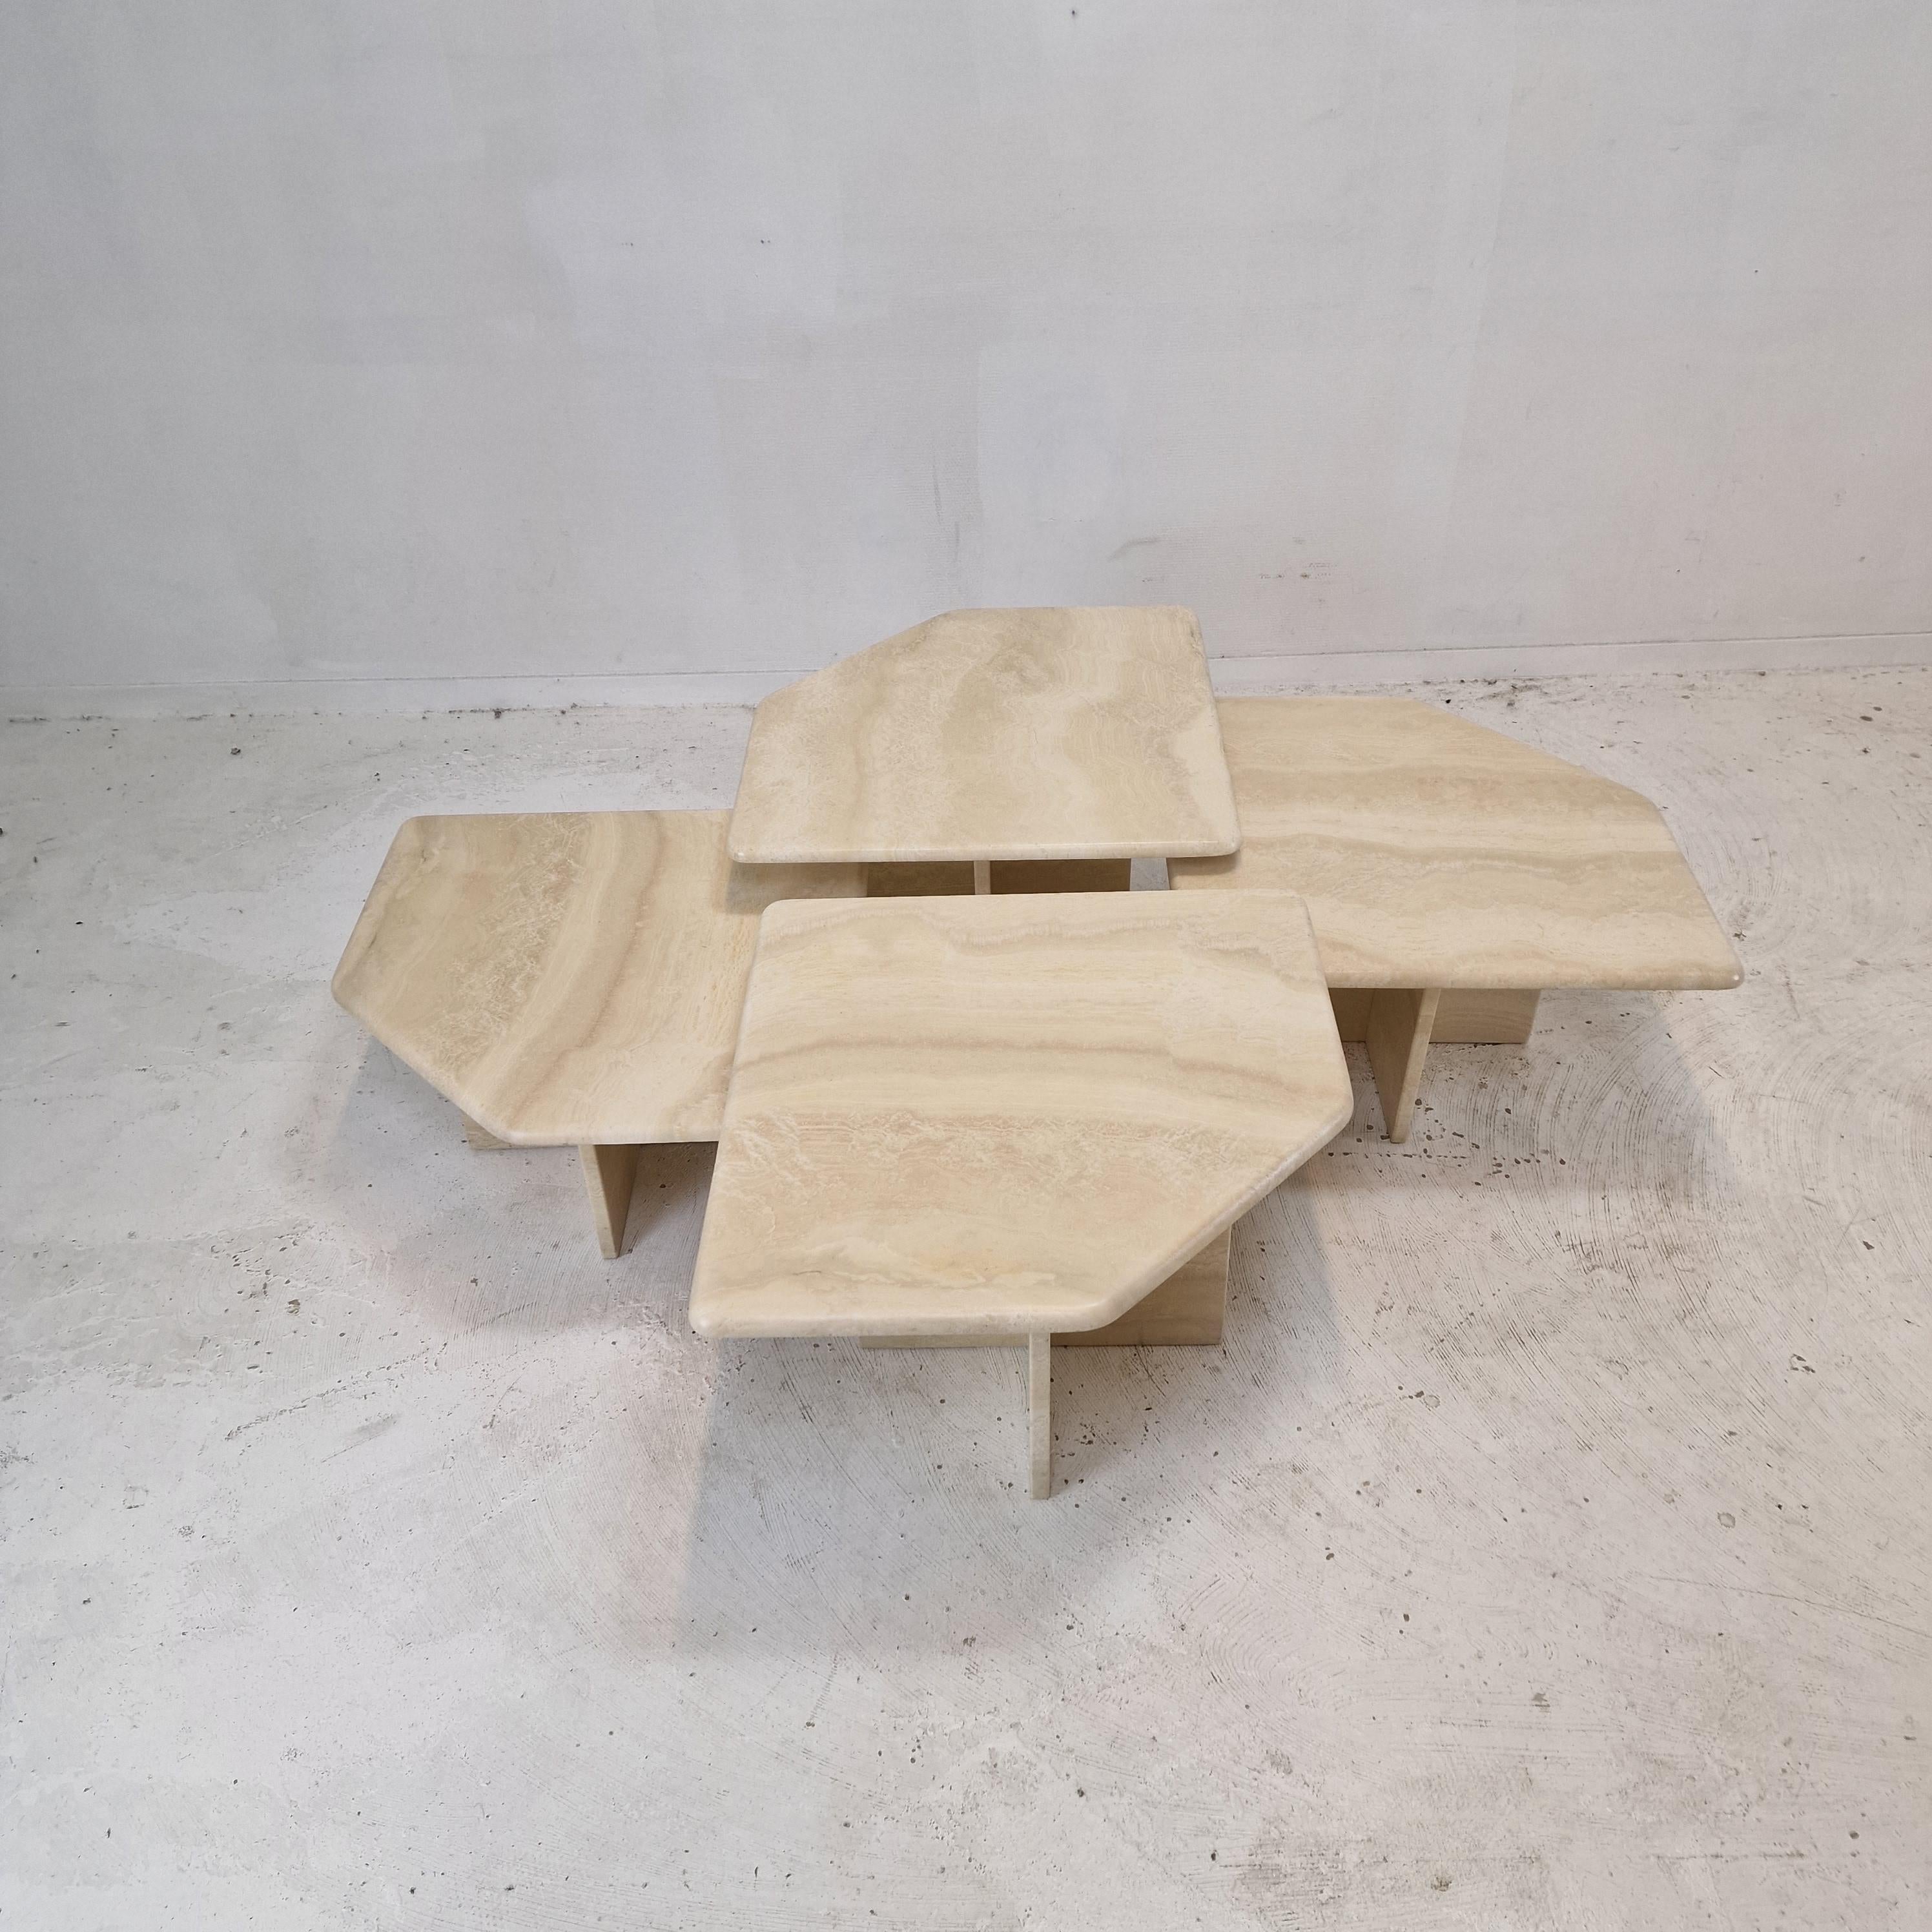 Hand-Crafted Set of 4 Italian Travertine Coffee or Side Tables, 1990s For Sale